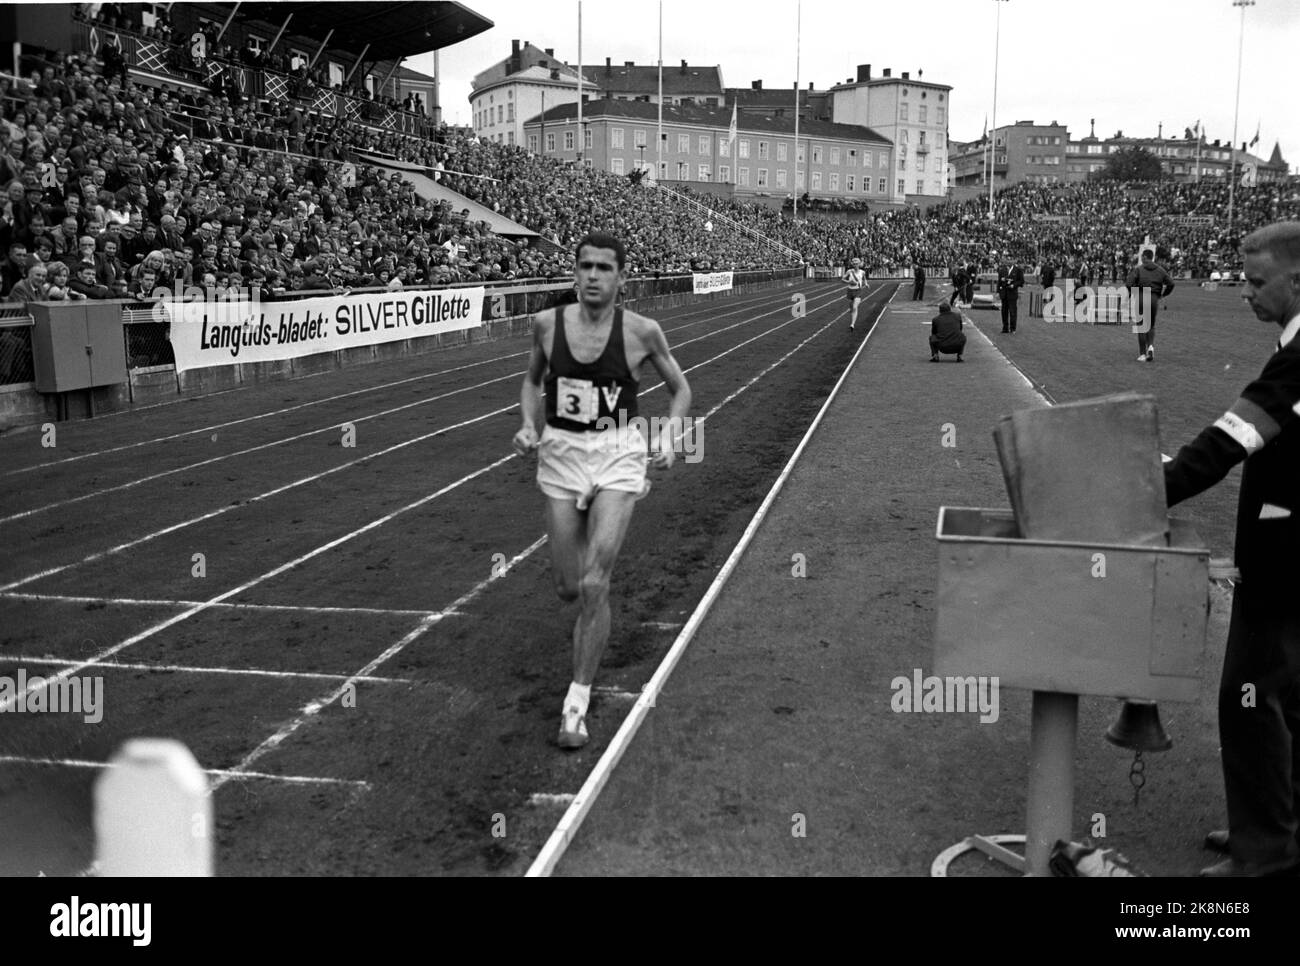 Oslo 19650714. Athletics: Australian Ron Clarke on his way to beating his own world record of 10,000 meters at Bislett Stadium. Clarke in action, for full stands at Bislett. The new record was 27.39.4. Photo: Storløkken / Current / NTB Stock Photo